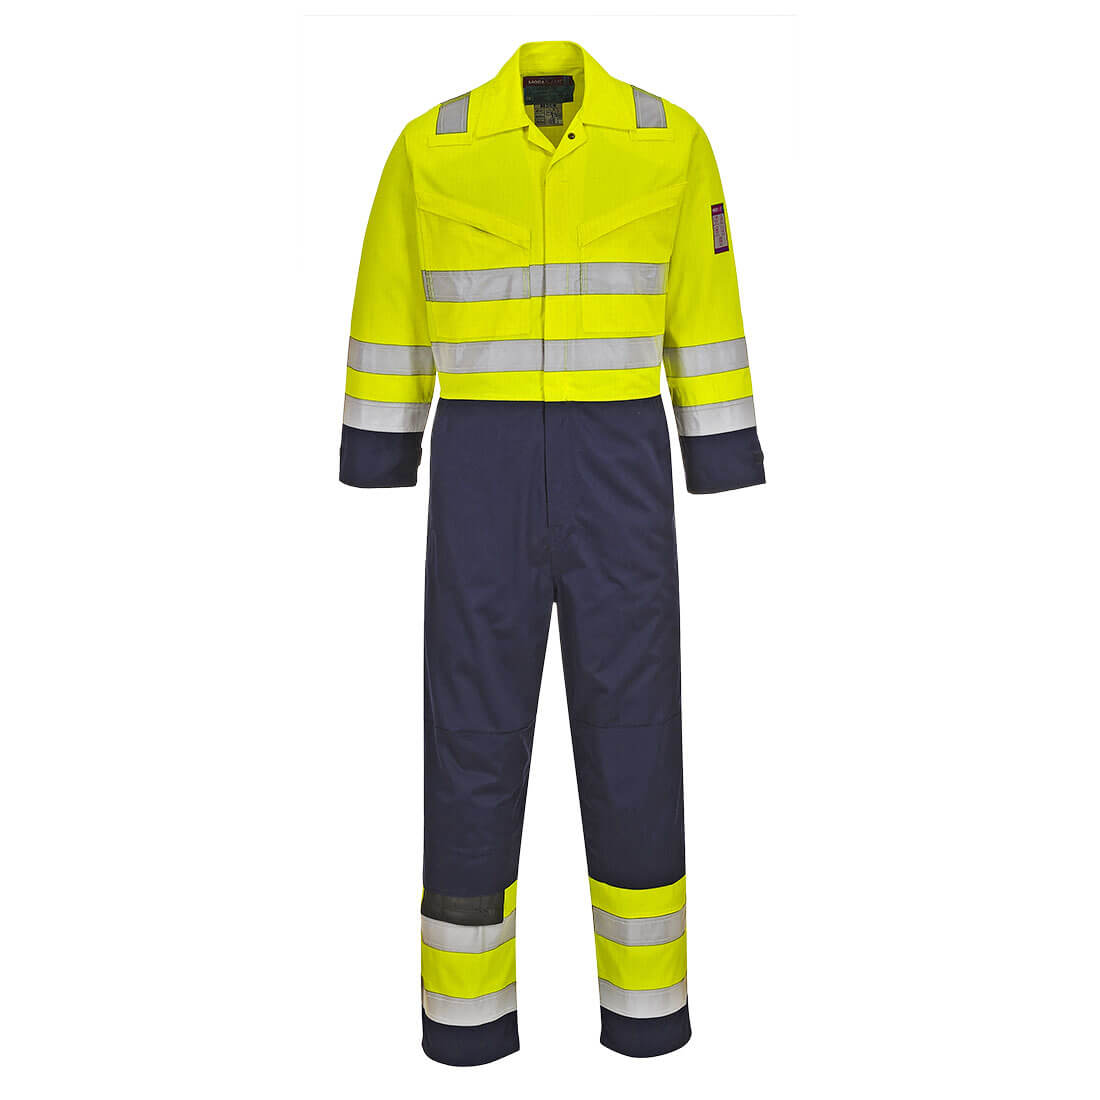 Image of Modaflame Flame Resistant Hi Vis Overall Yellow / Navy 3XL 32"